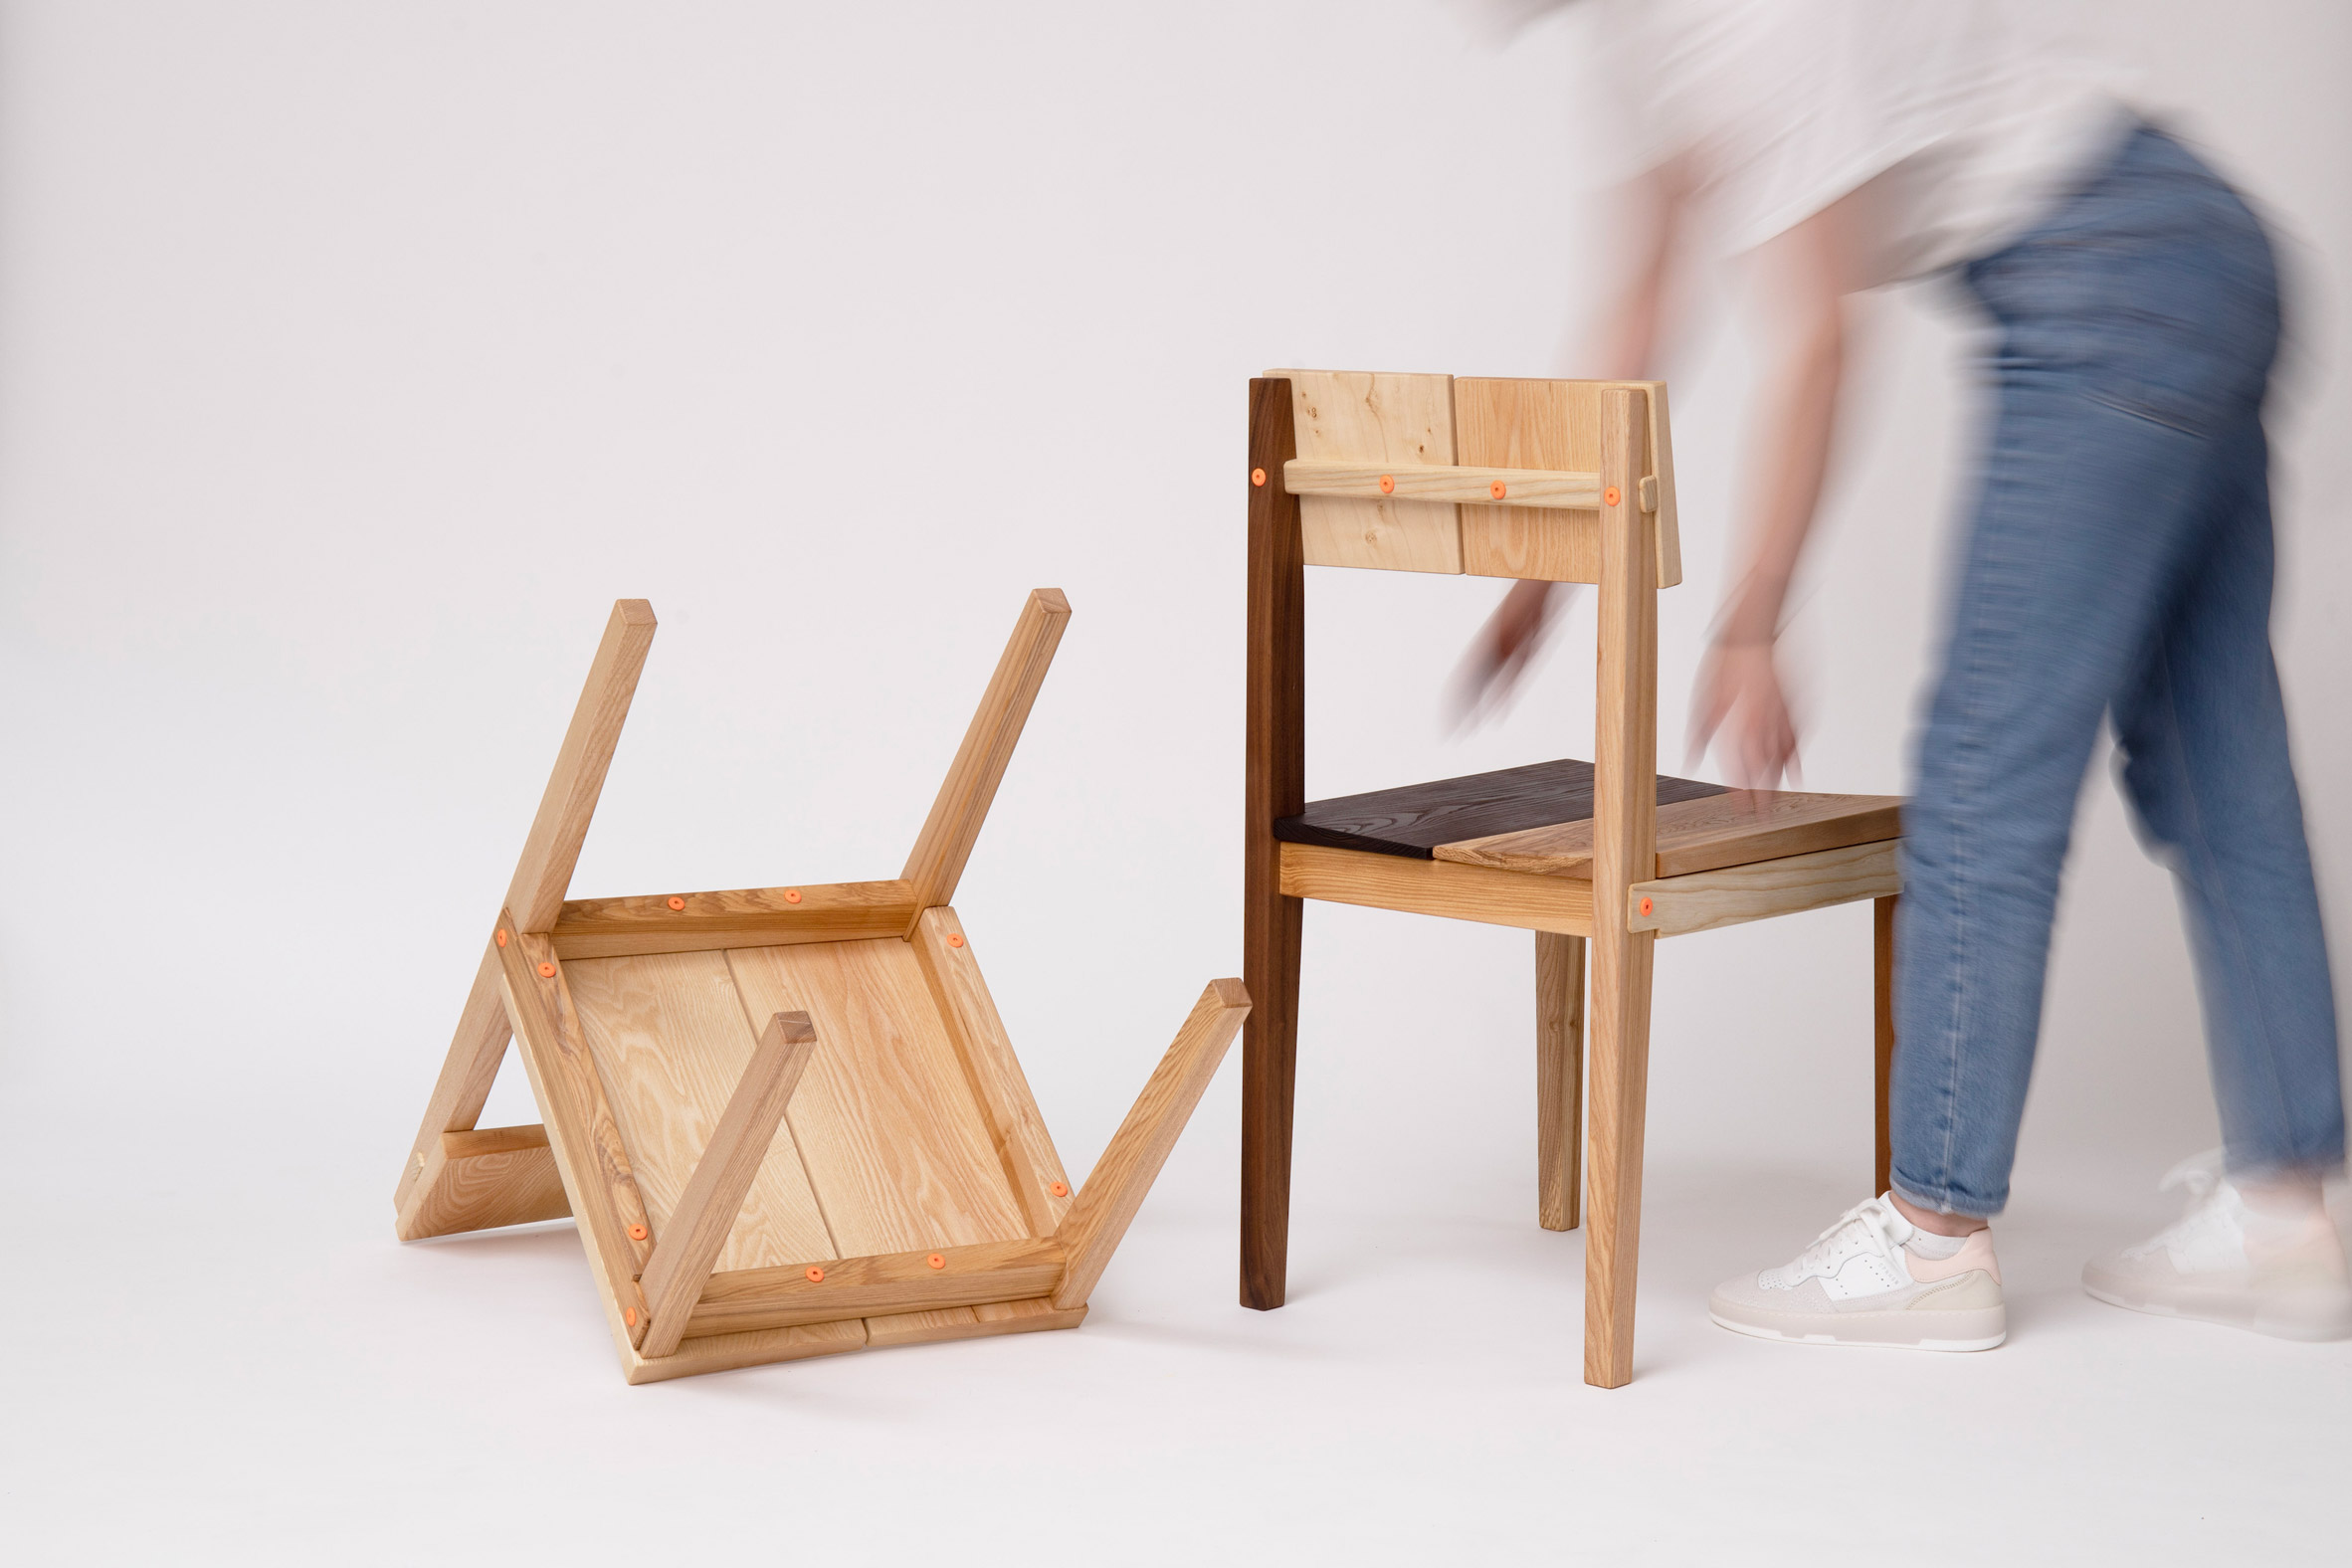 two chairs assembled with different woods